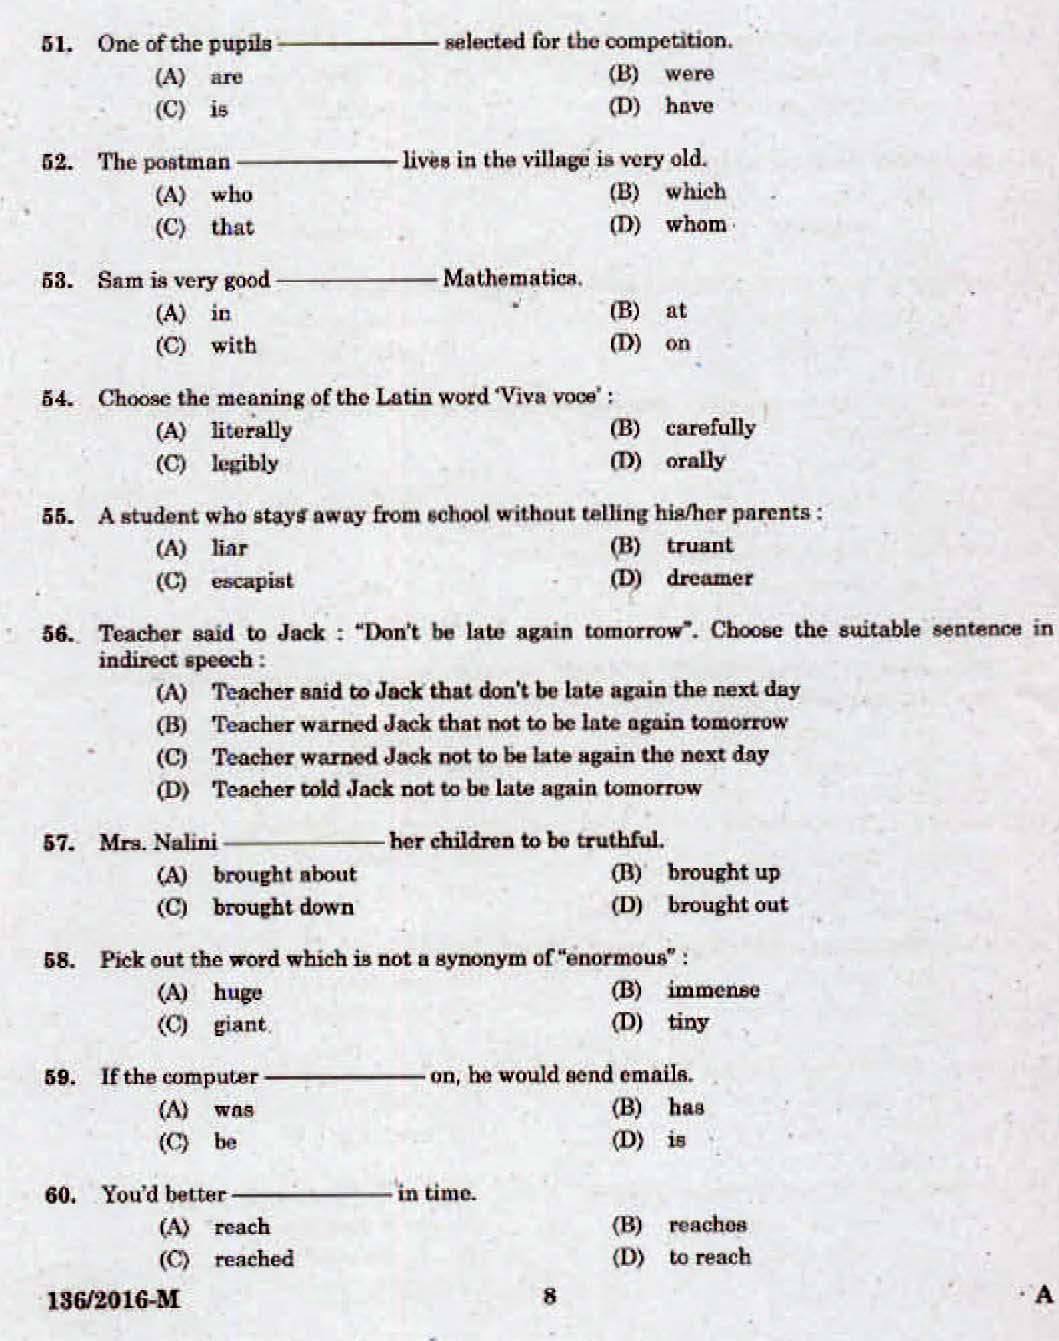 LD Clerk Question Paper Malayalam 2016 Paper Code 1362016 M 6